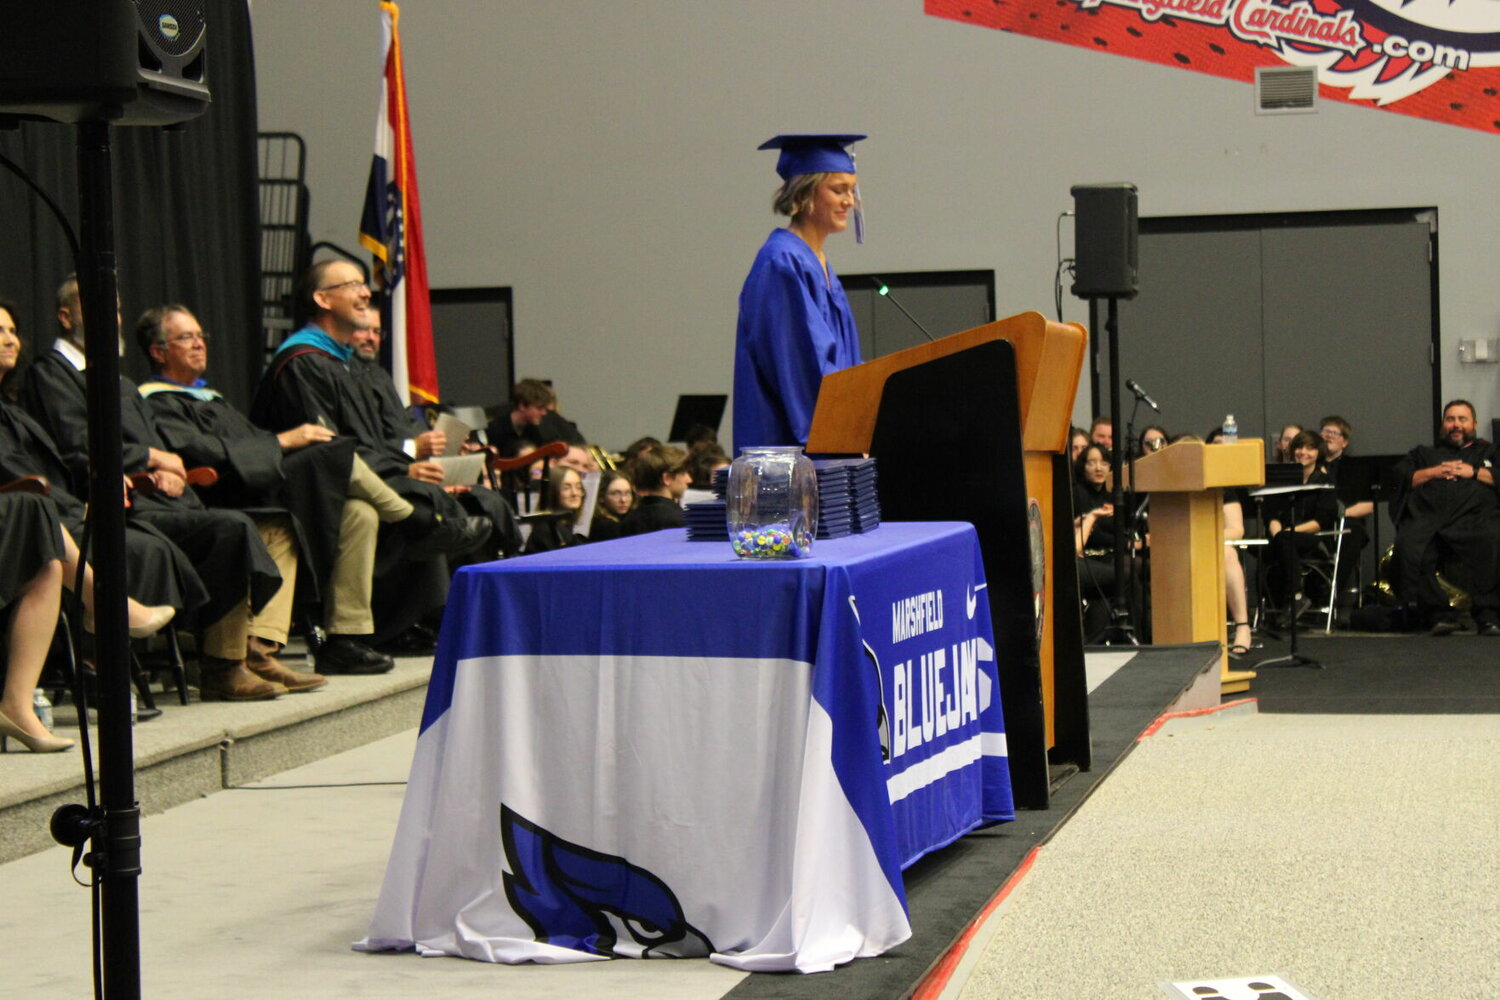 Addressing her class one last time is student body president Macie James. Shortly after, her class gave Principal Curley all the marbles he had lost over the years.